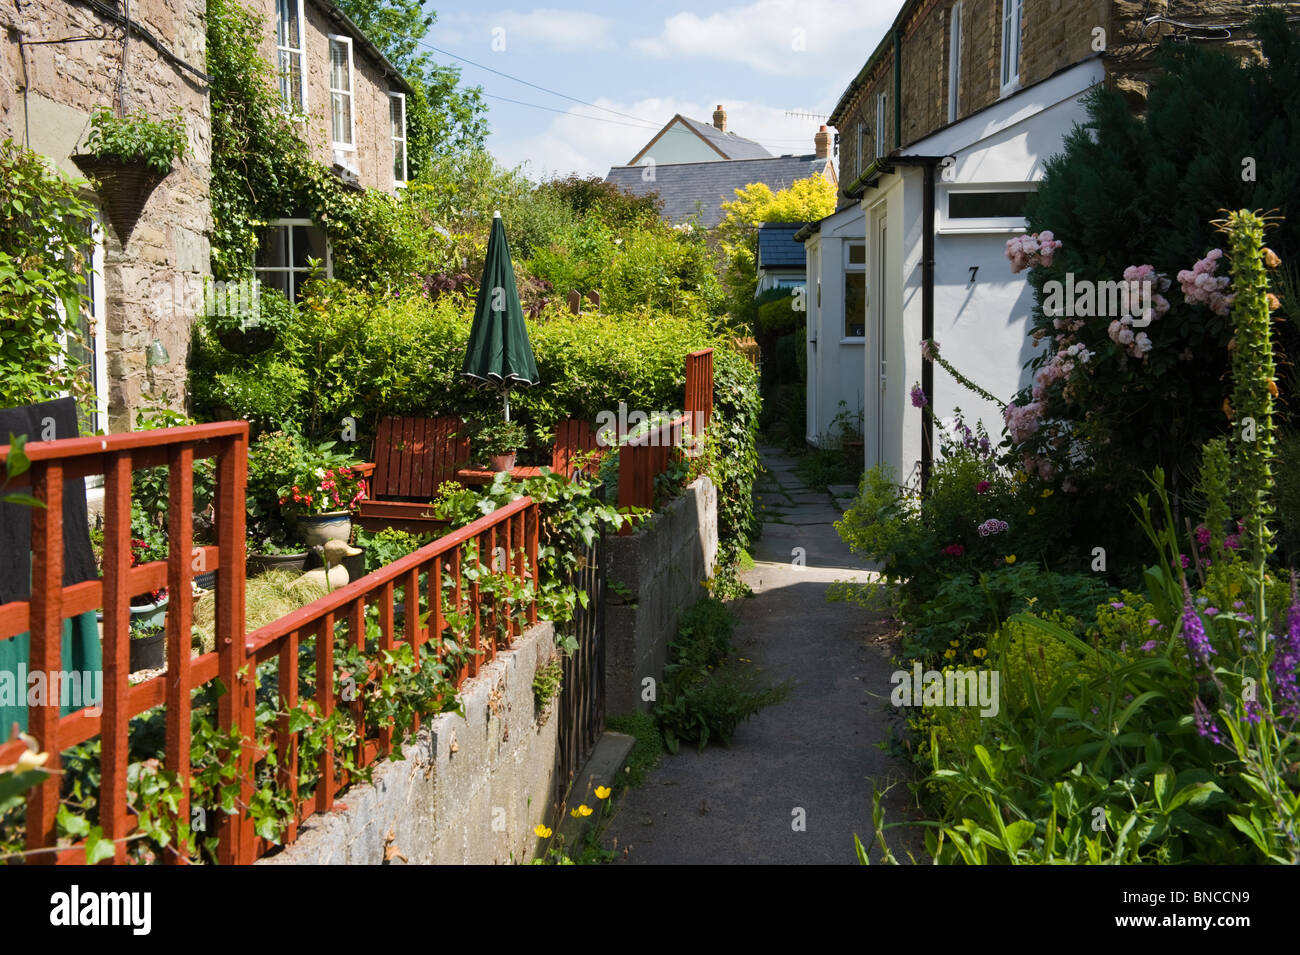 Picturesque garden cottages with footpath between in Hay-on-Wye Powys Wales UK Stock Photo